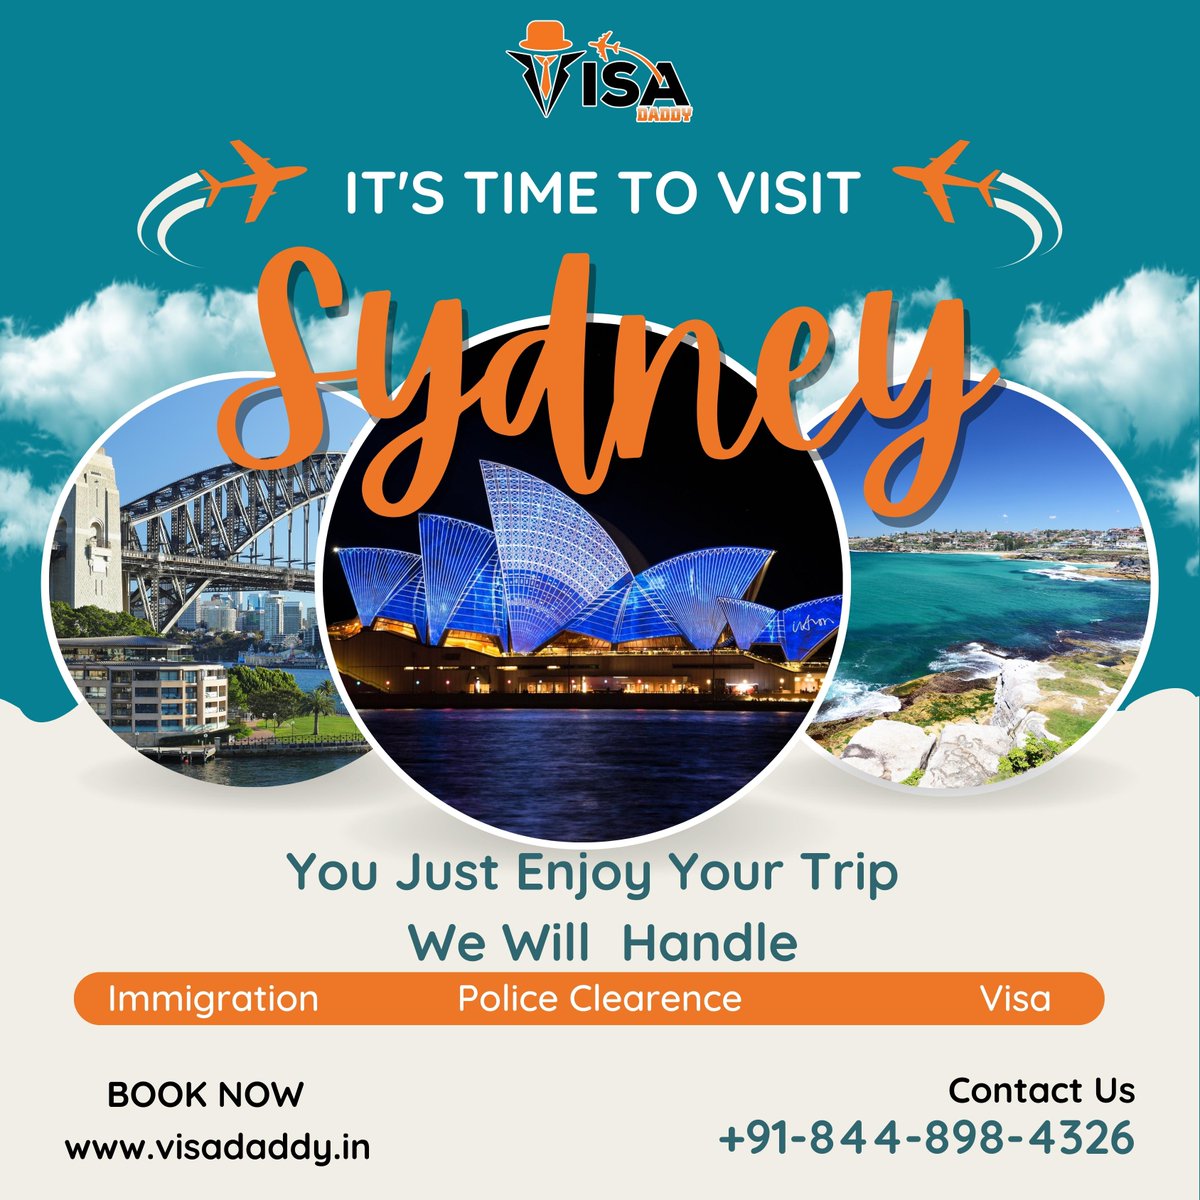 Pack Your Bags and Explore the Magic of Sydney! Your Next Adventure Awaits 🌆✈️

APPLY NOW!
To Know More Connect With Us:-
Call On +91-8448-984-326
Apply Here at visadaddy.in
Ask Anything On info@visadaddy.in

#visadaddy #SydneyCalling #SydneyAdventure #ExploreDown